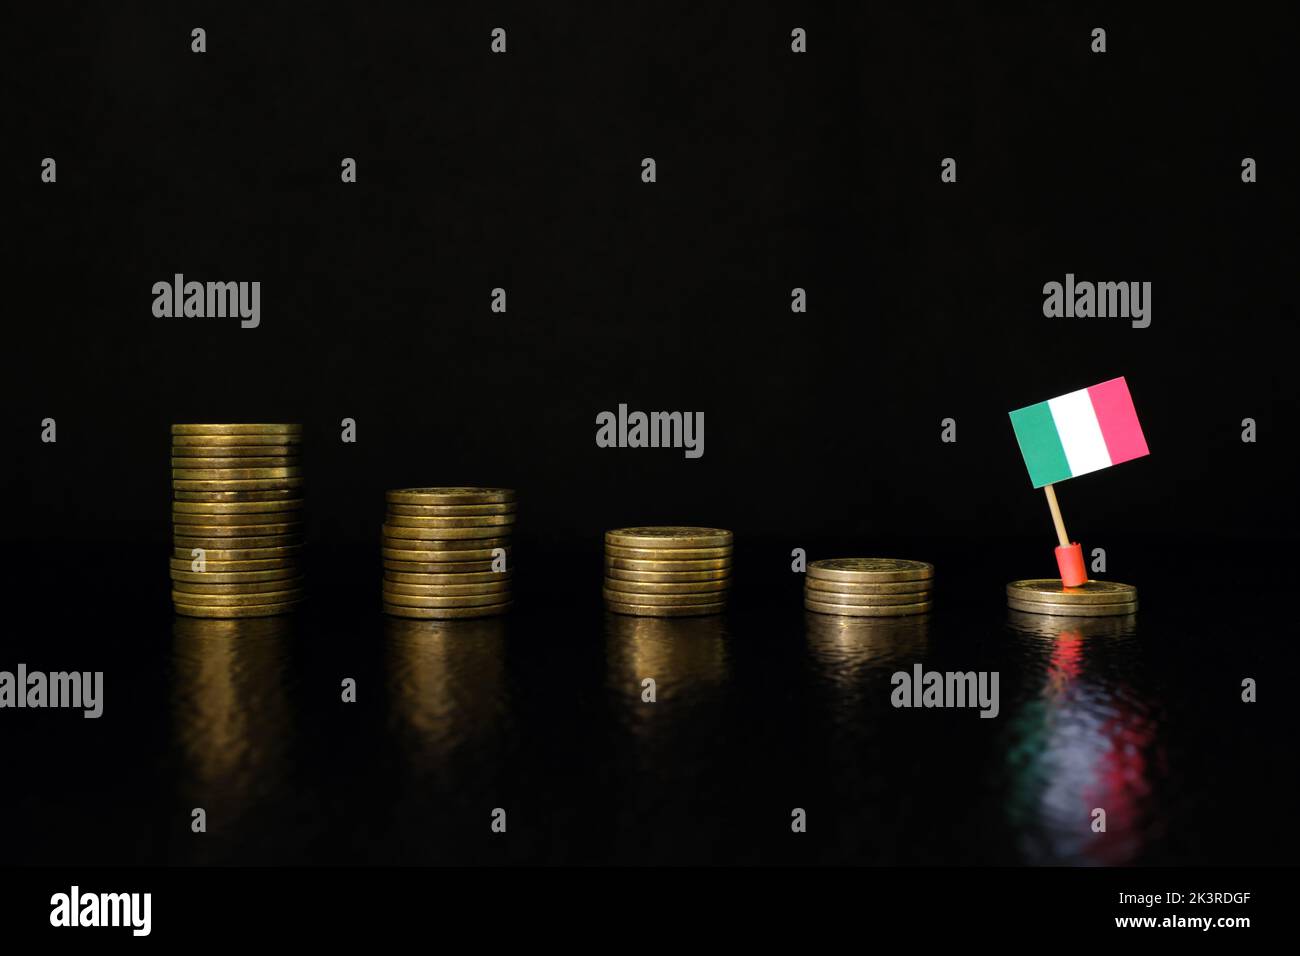 Italy economic recession, financial crisis and currency depreciation concept. Italian flag in decreasing stack of coins in dark black background. Stock Photo